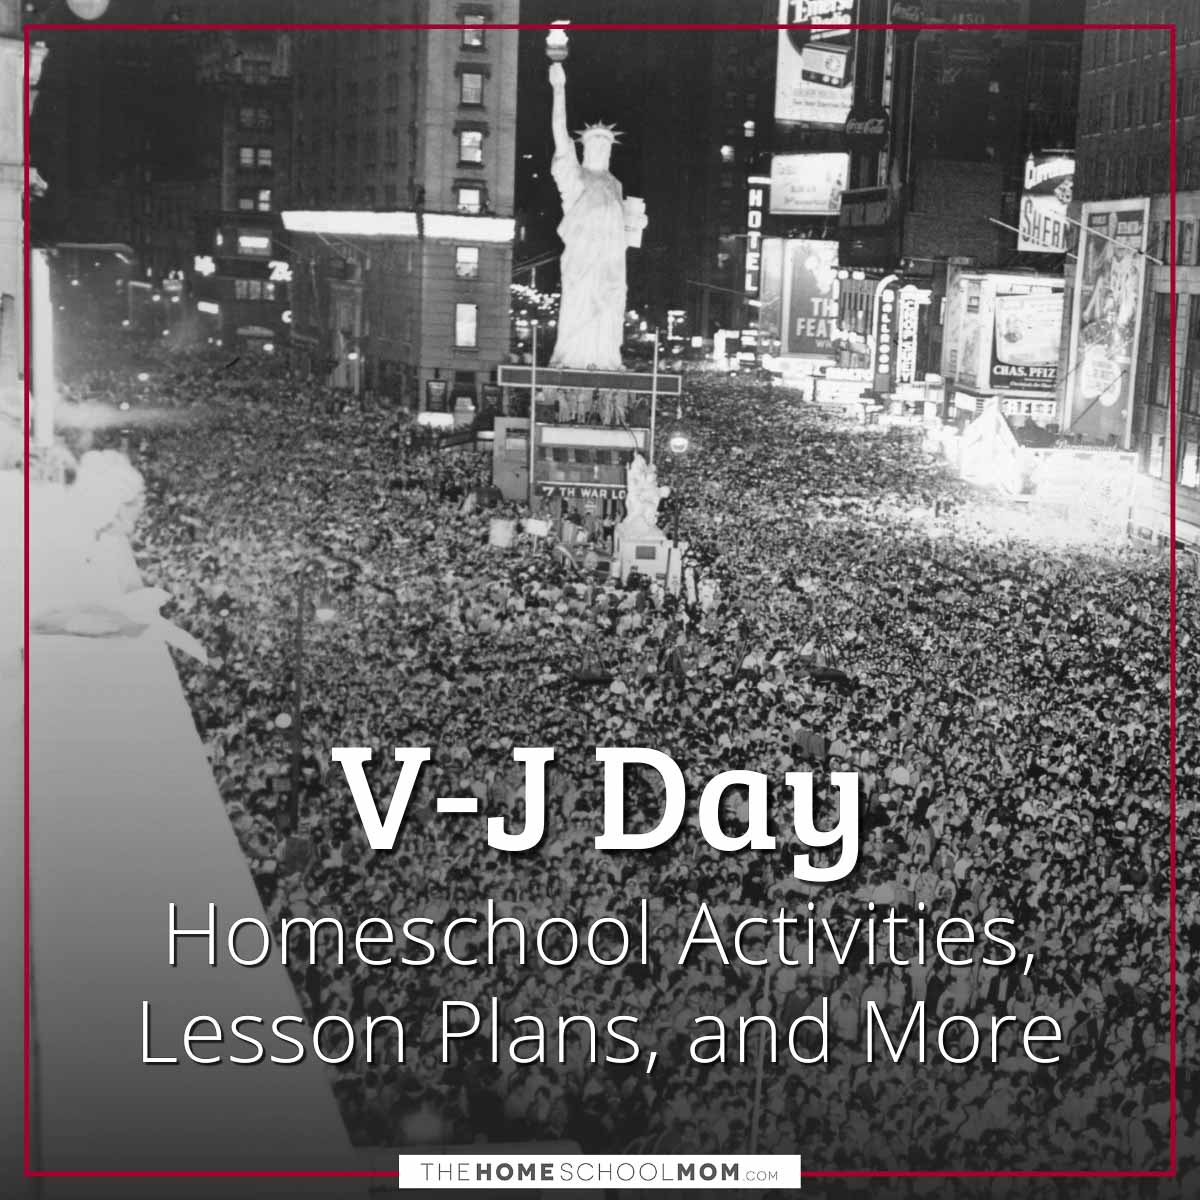 Victory Over Japan Day (VJ Day) Homeschool Activities, Lesson Plans, and More.